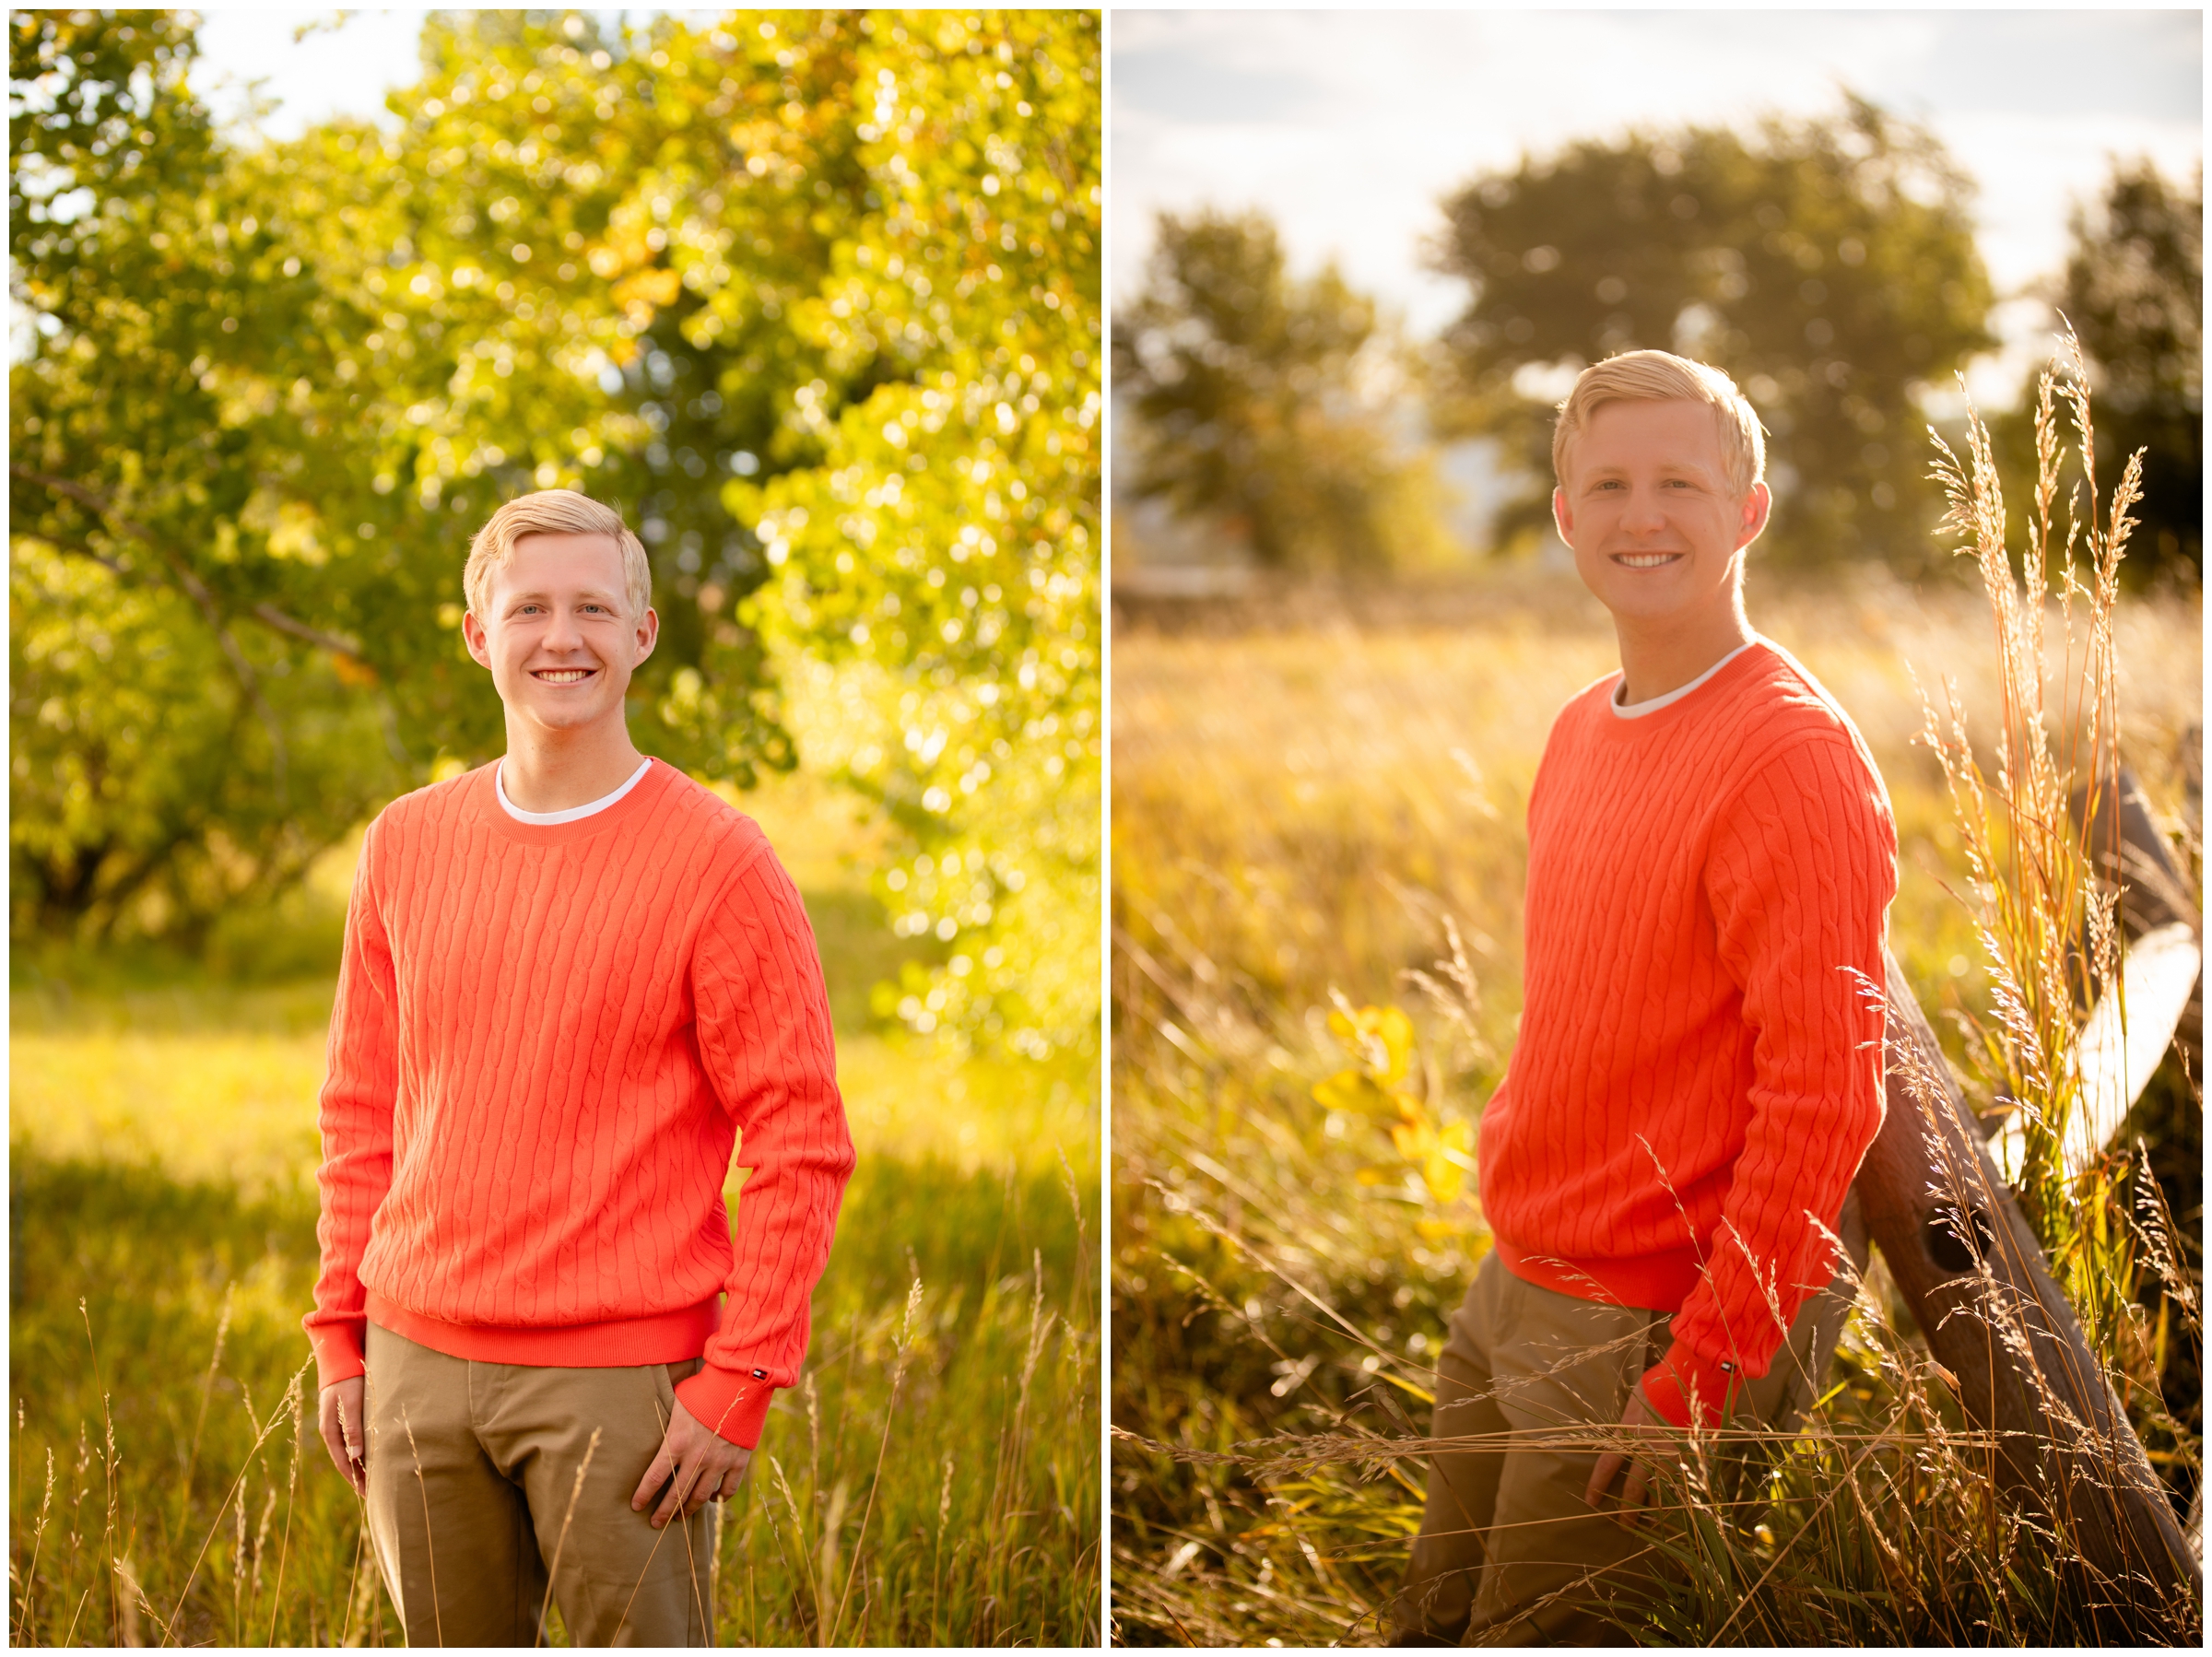 Frederick High senior photos at Coot Lake during fall by Colorado portrait photographer Plum Pretty Photography